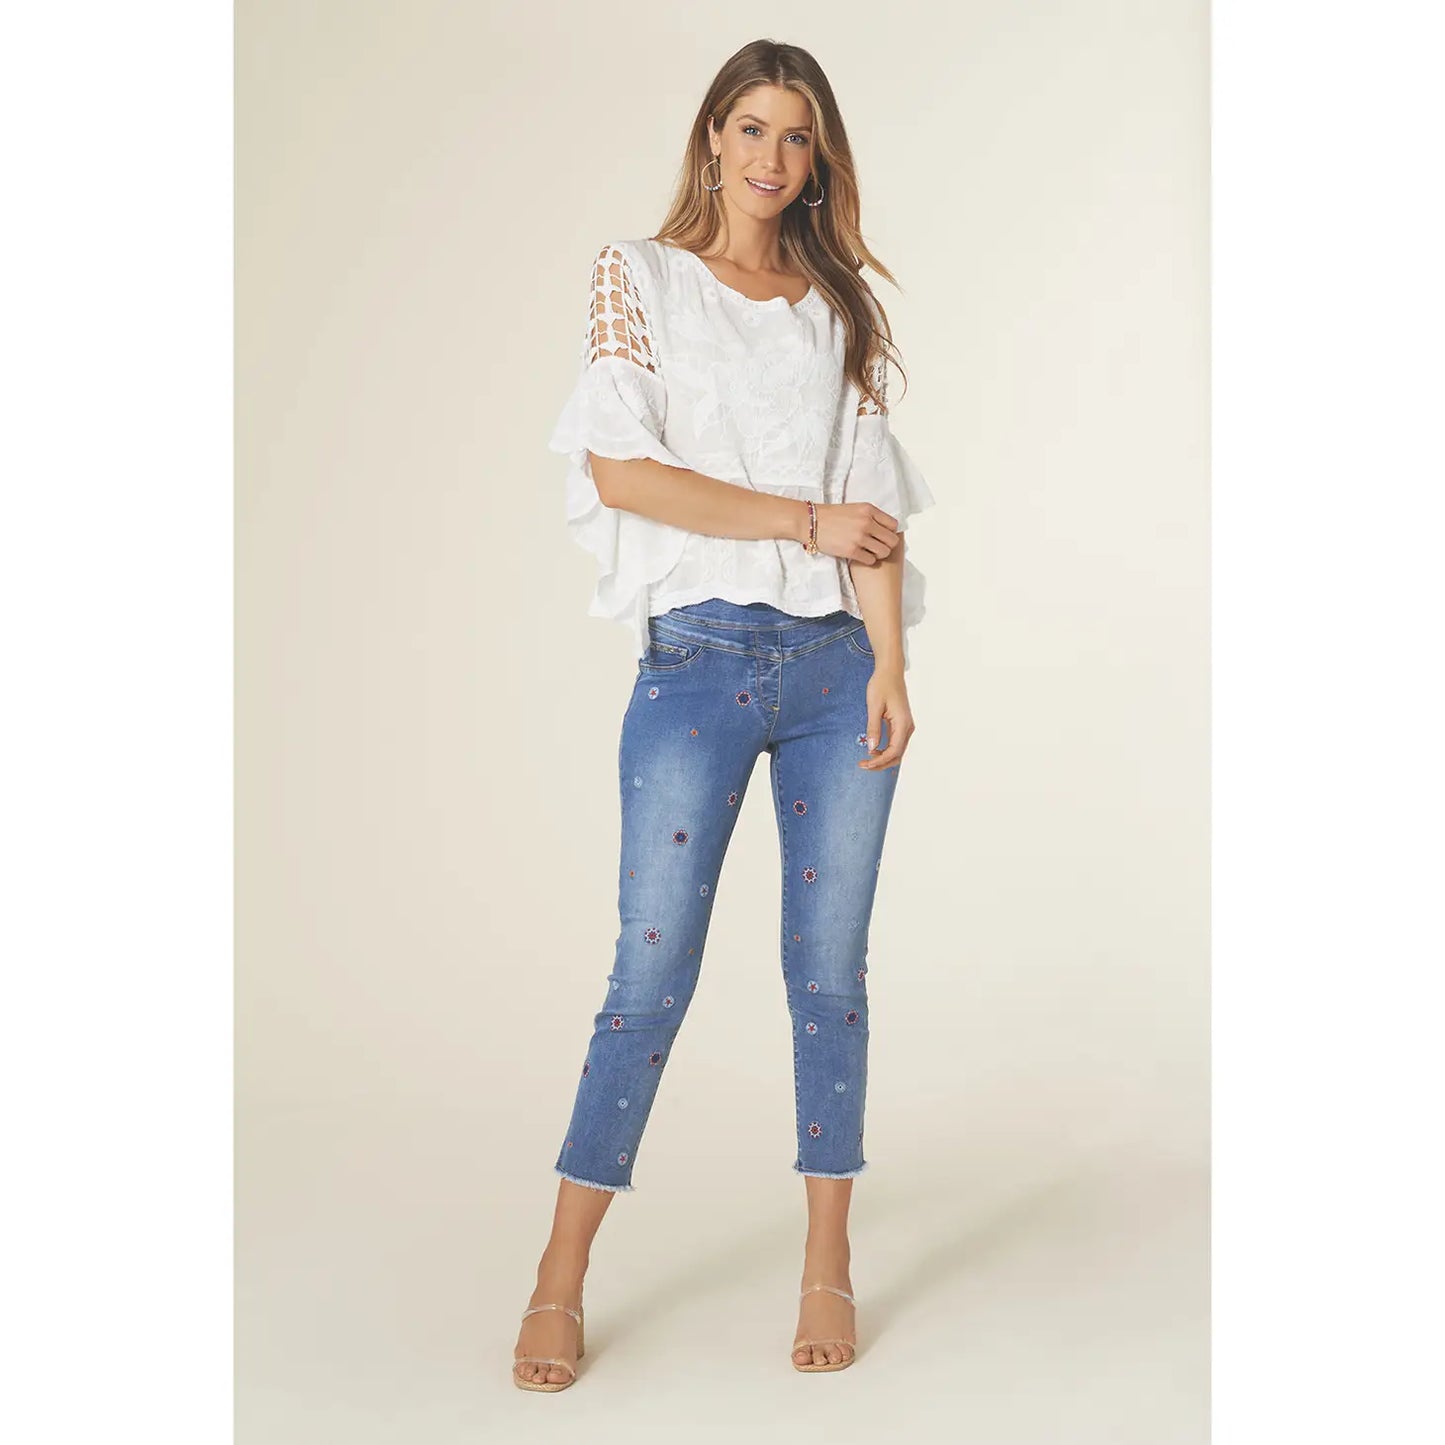 Embroidered Omazing cropped Jeans